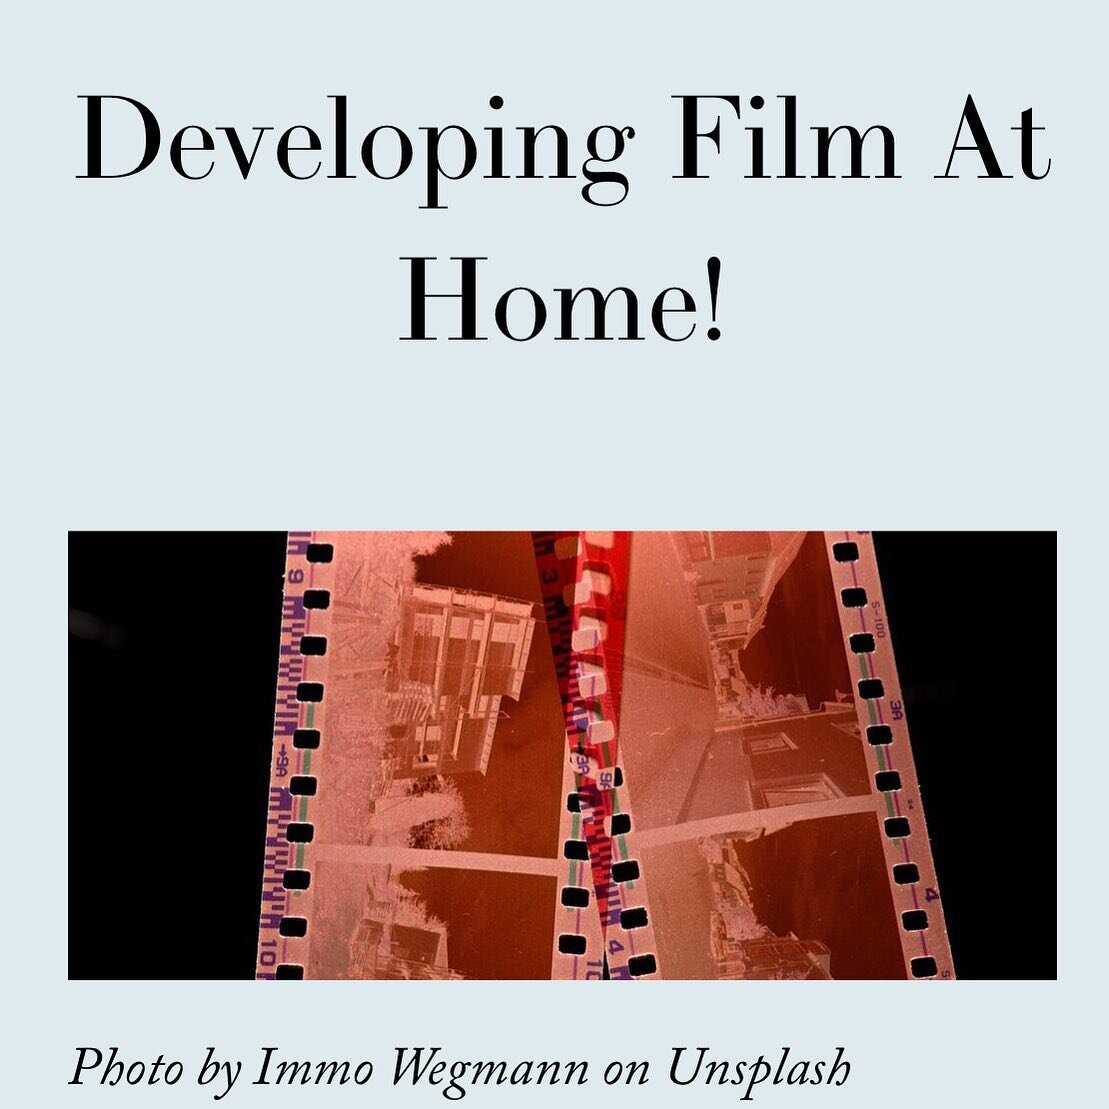 We have a new article up on the website! Link in our bio on how to set up your space to develop film! Let us know what you think down below 🤩